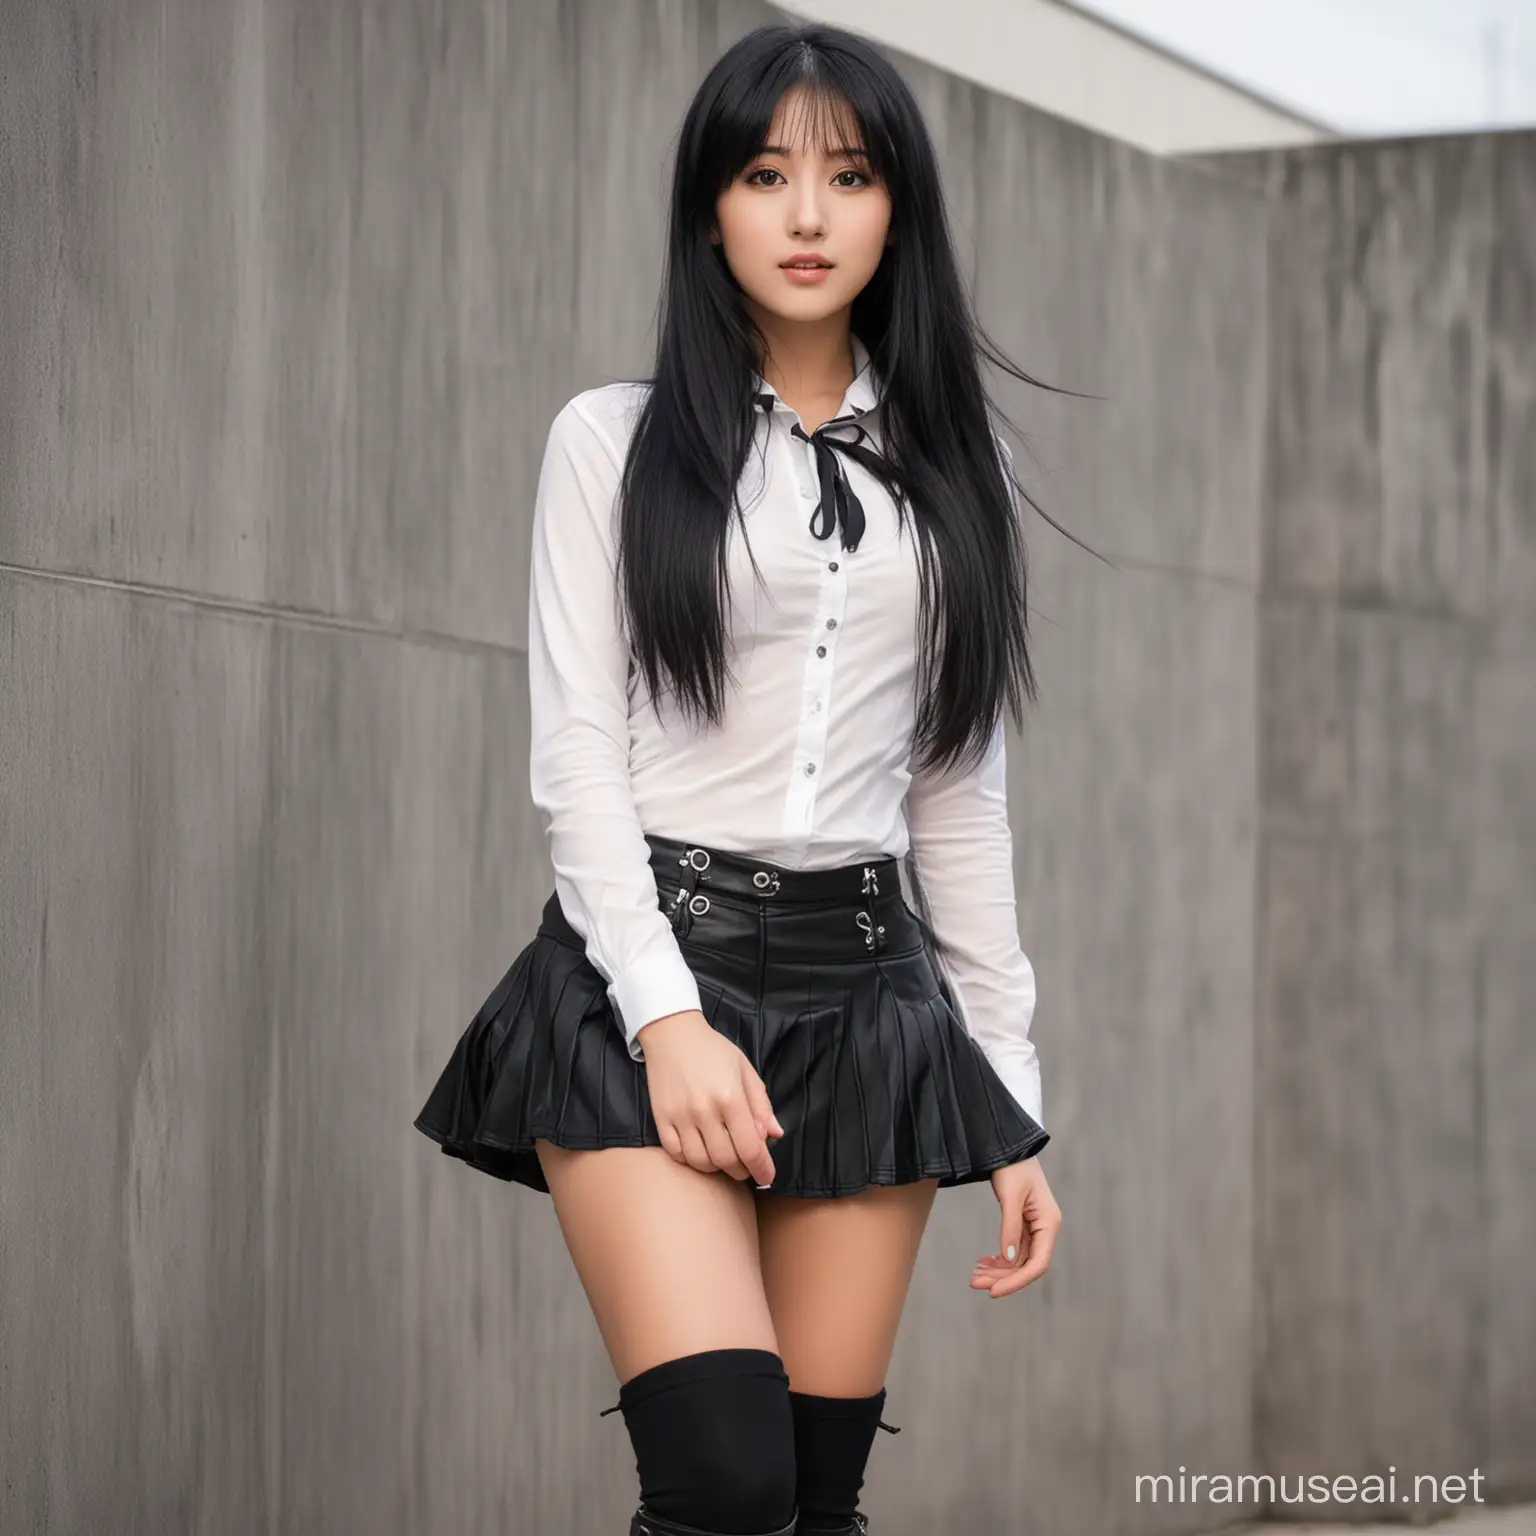 Chic Fashionista Stylish Woman with Long Black Hair and Boots